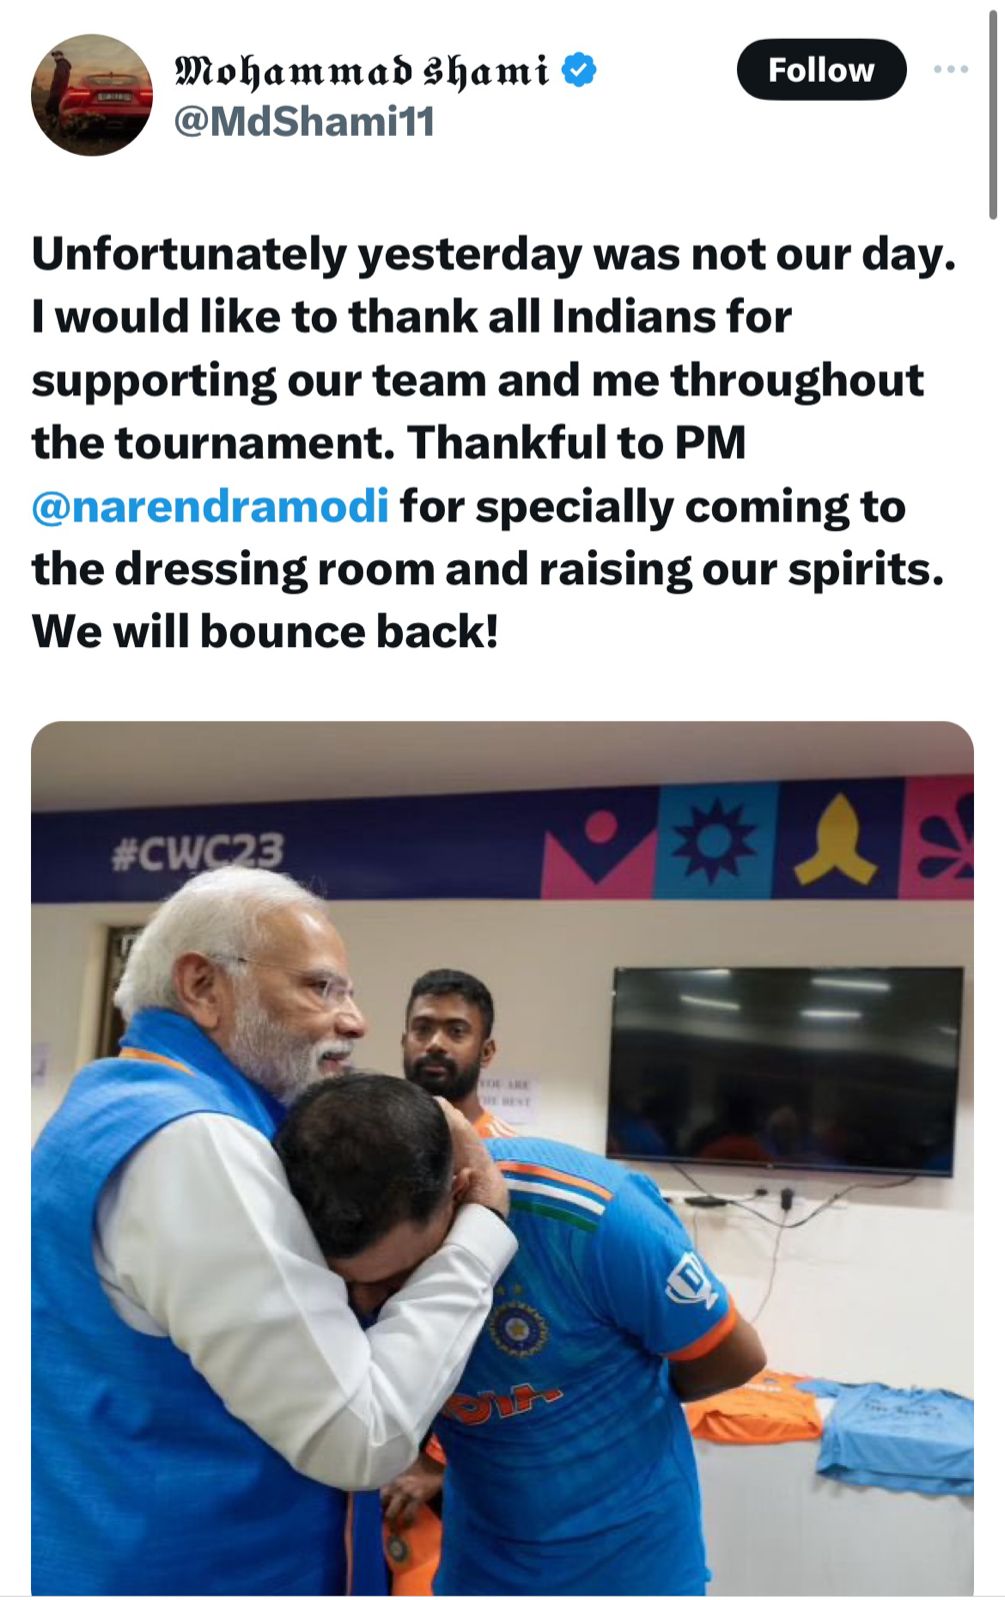 Mohammed Shami Expresses Gratitude To PM Modi And India For Support